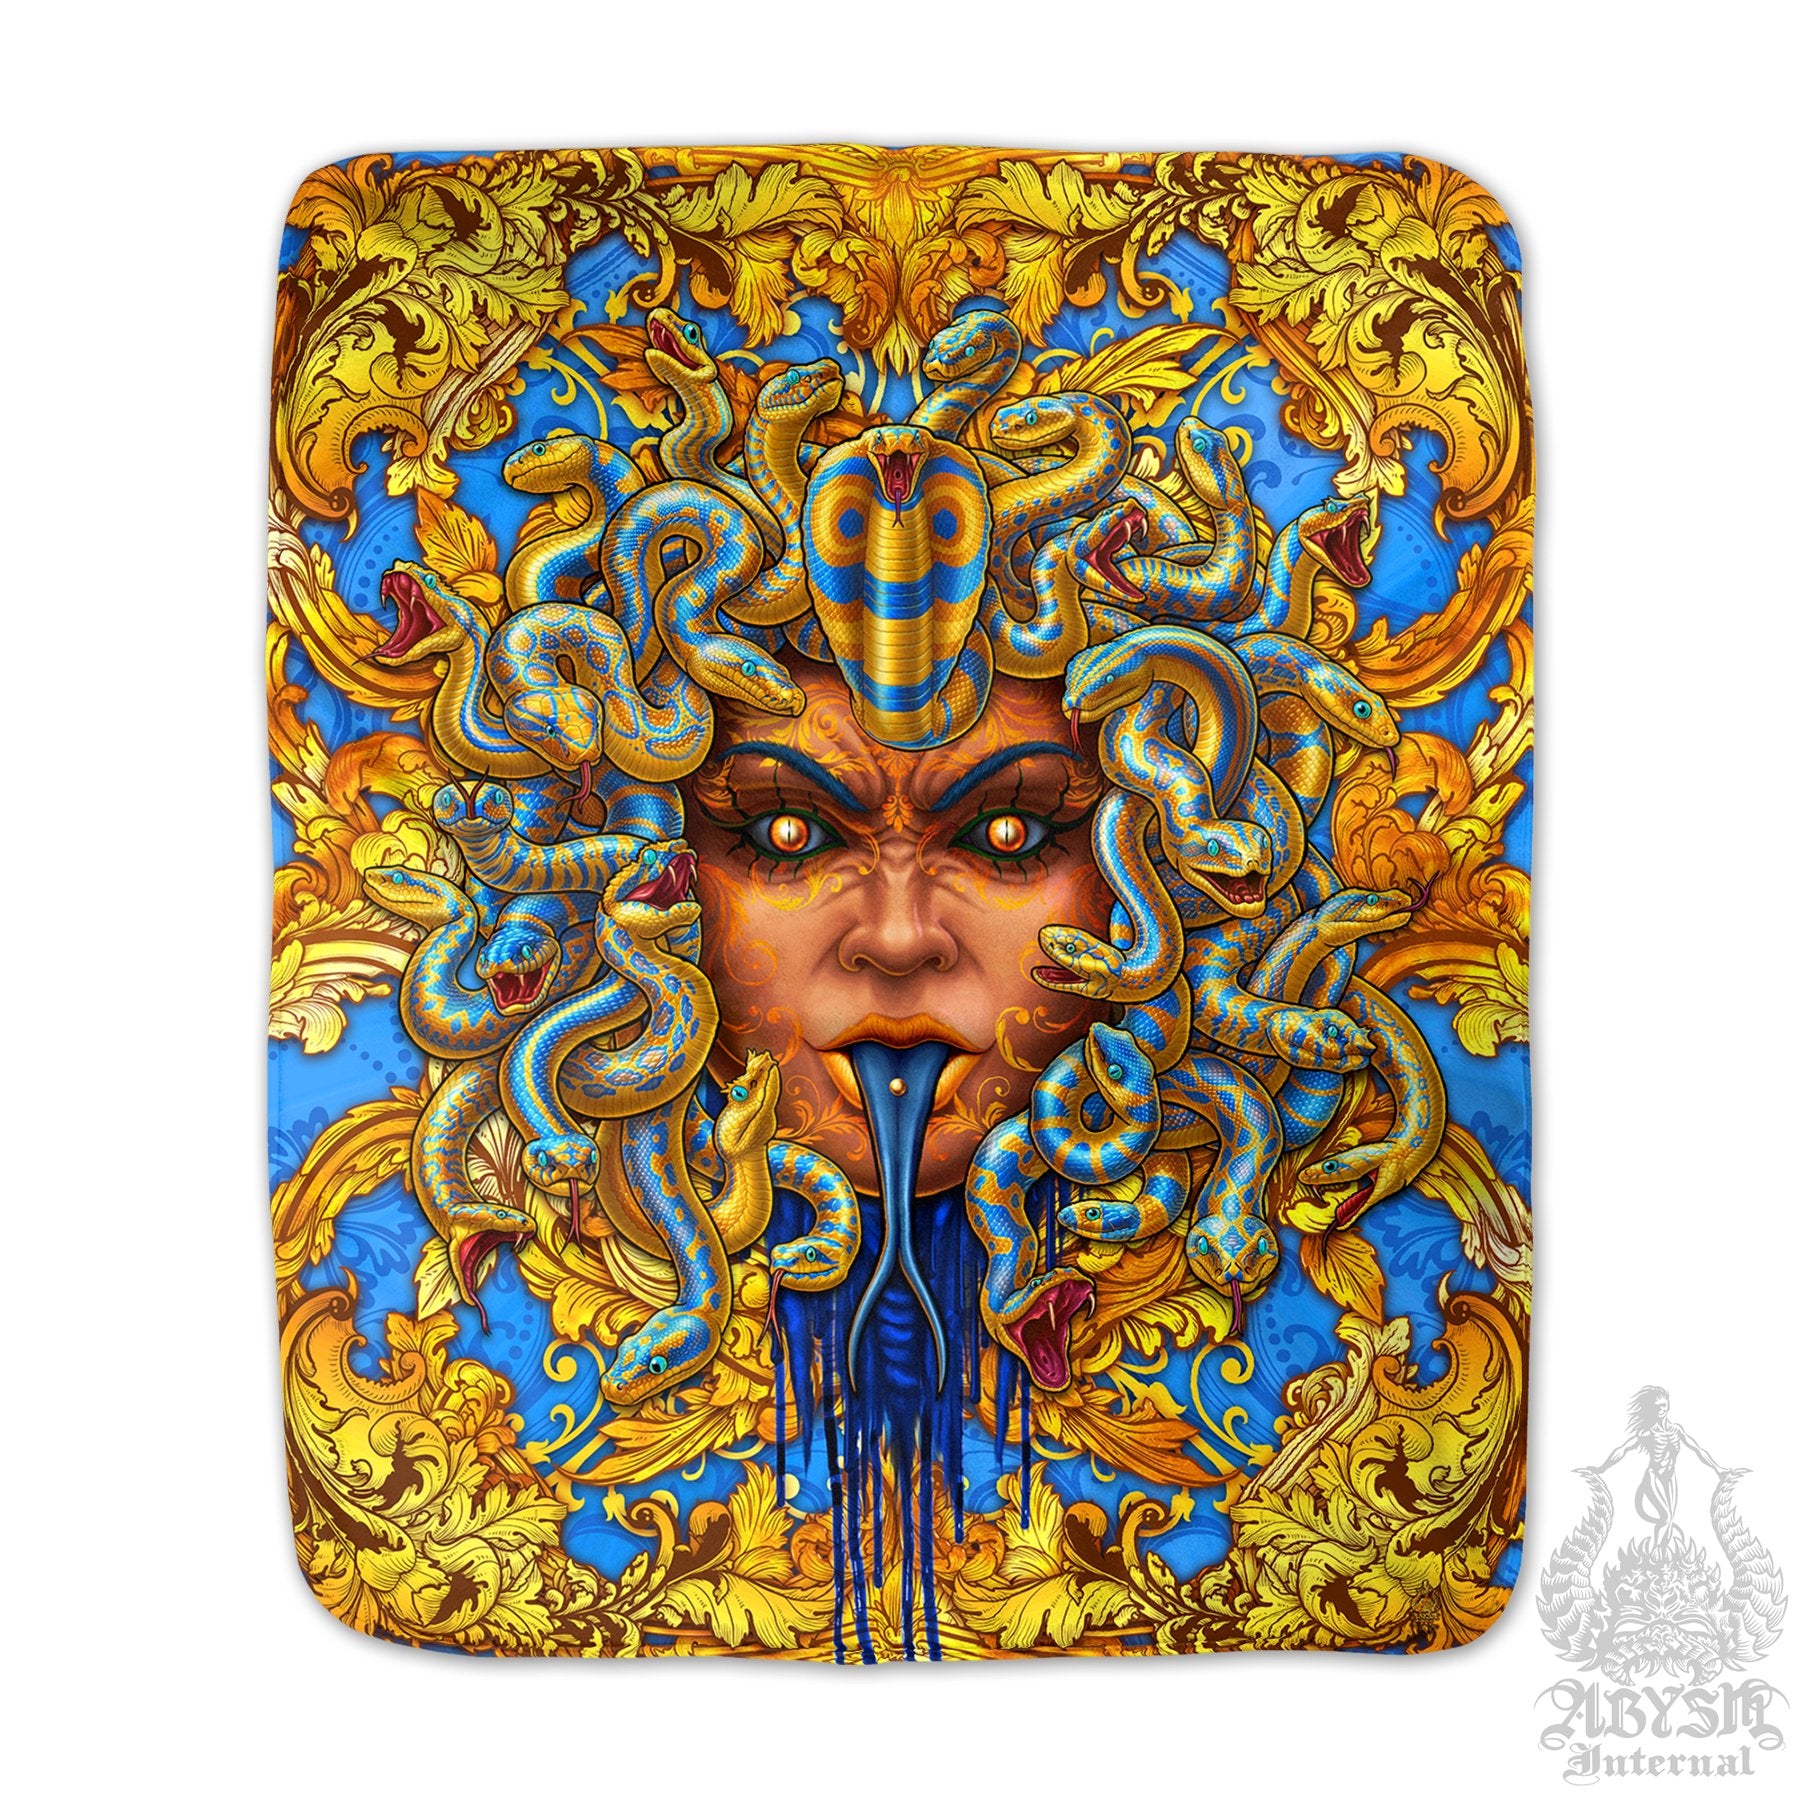 Medusa Sherpa Fleece Throw Blanket, Eclectic Decor, Eclectic and Funky Gift, Skull Art - Cyan Blue & Gold Snakes, 2 Faces - Abysm Internal